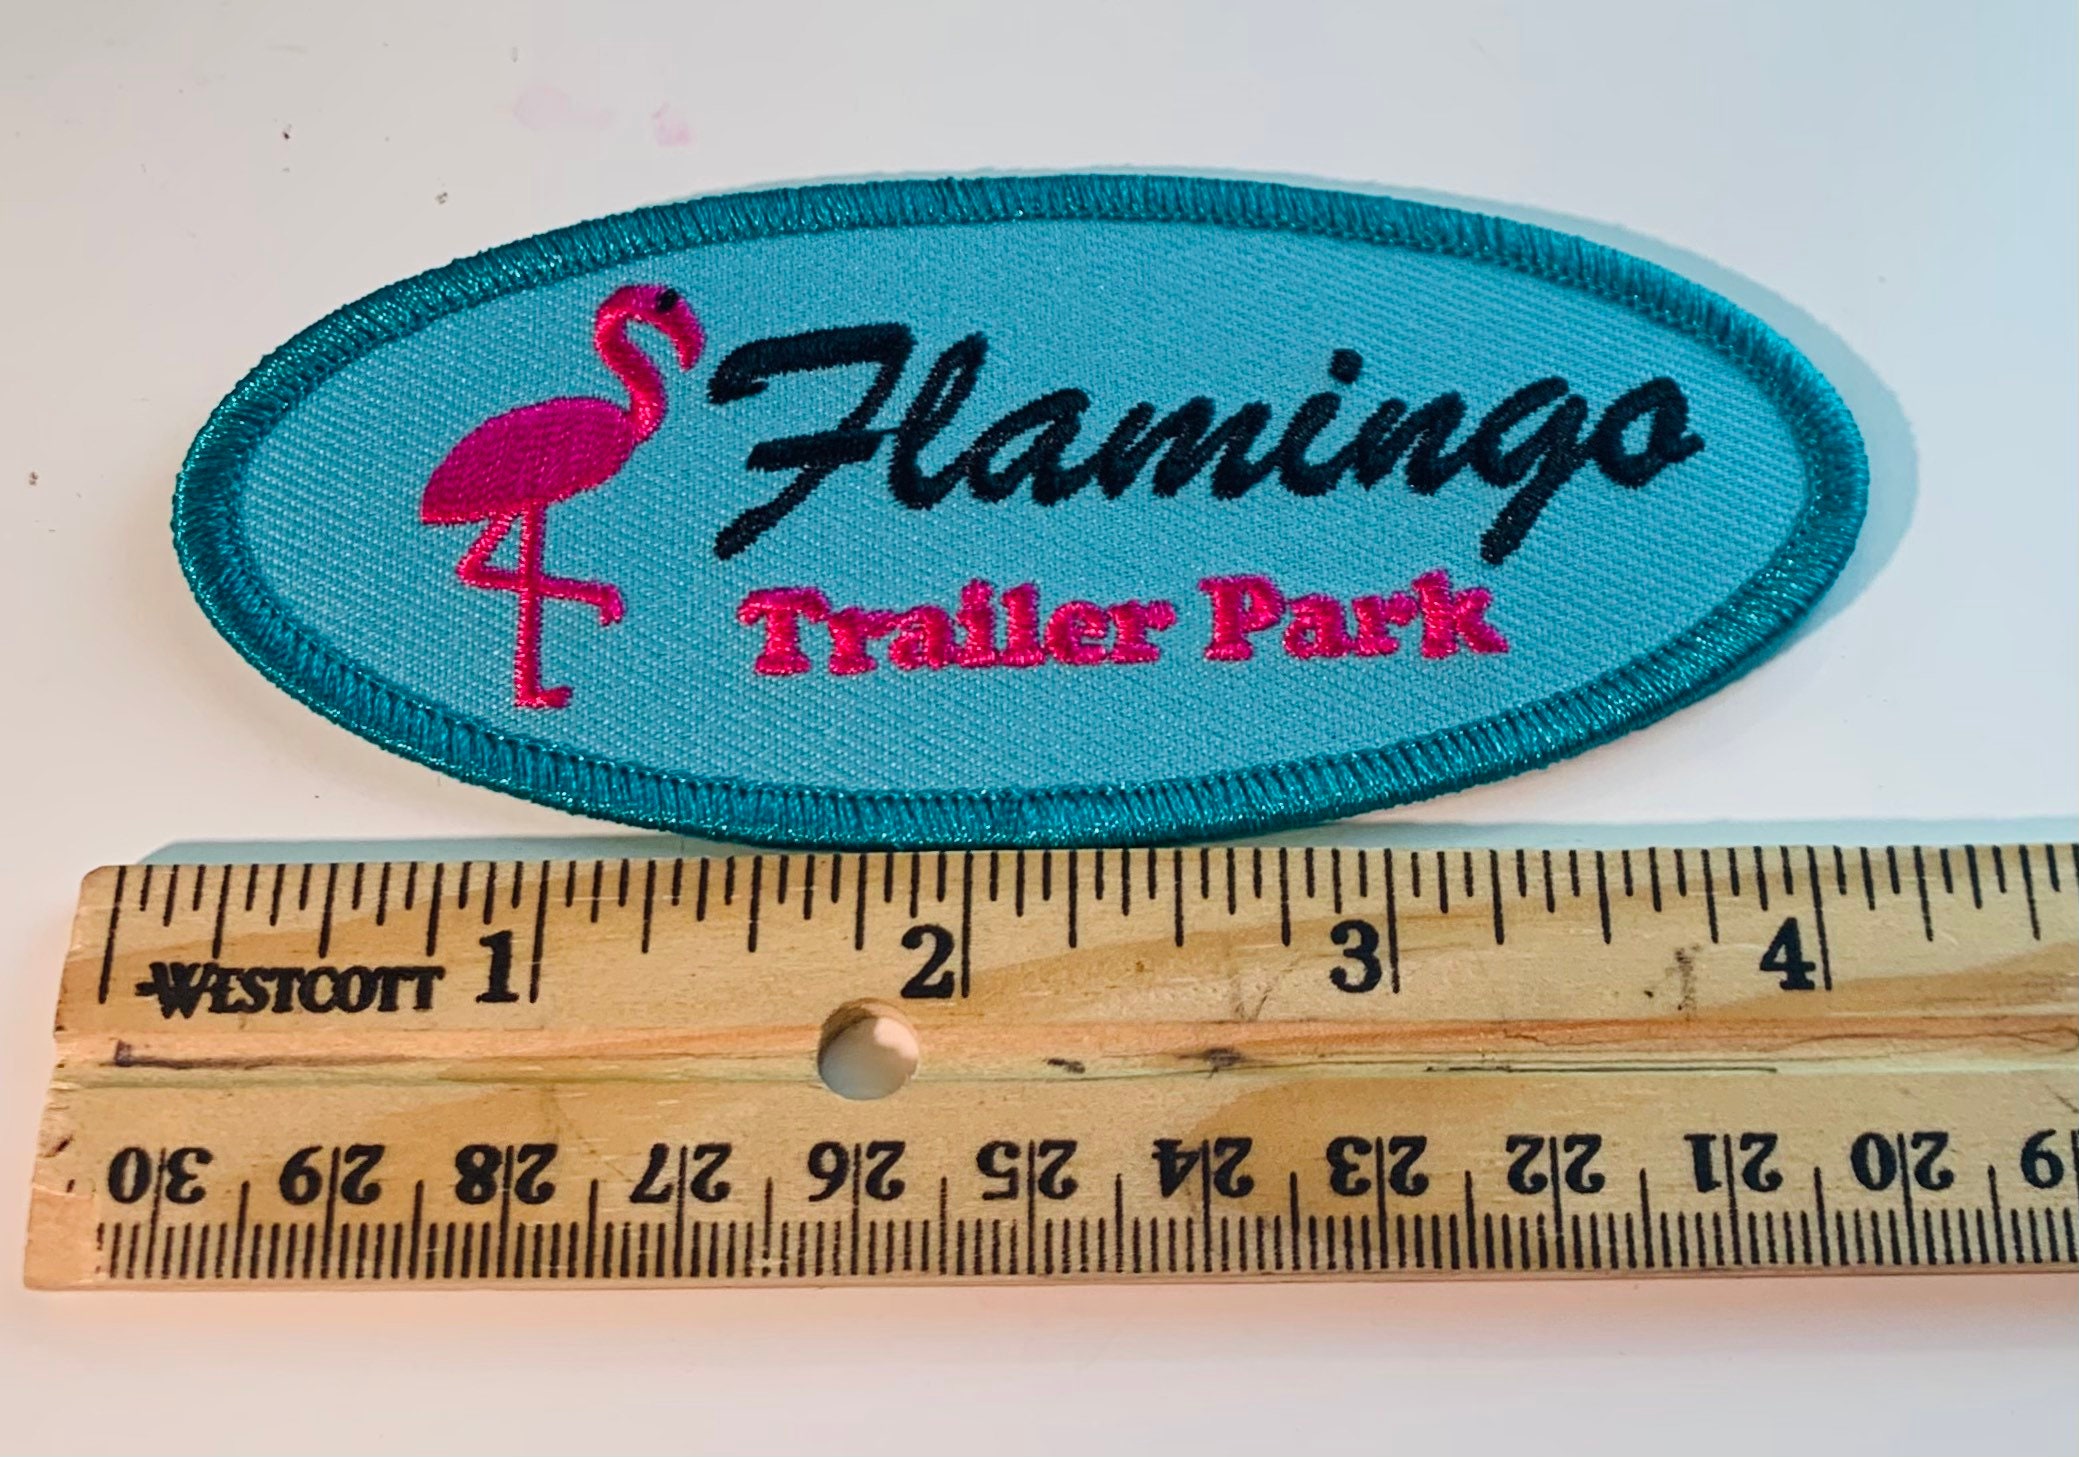 Flamingo Trailer Park Applique Patch Iron on Teal and Pink 